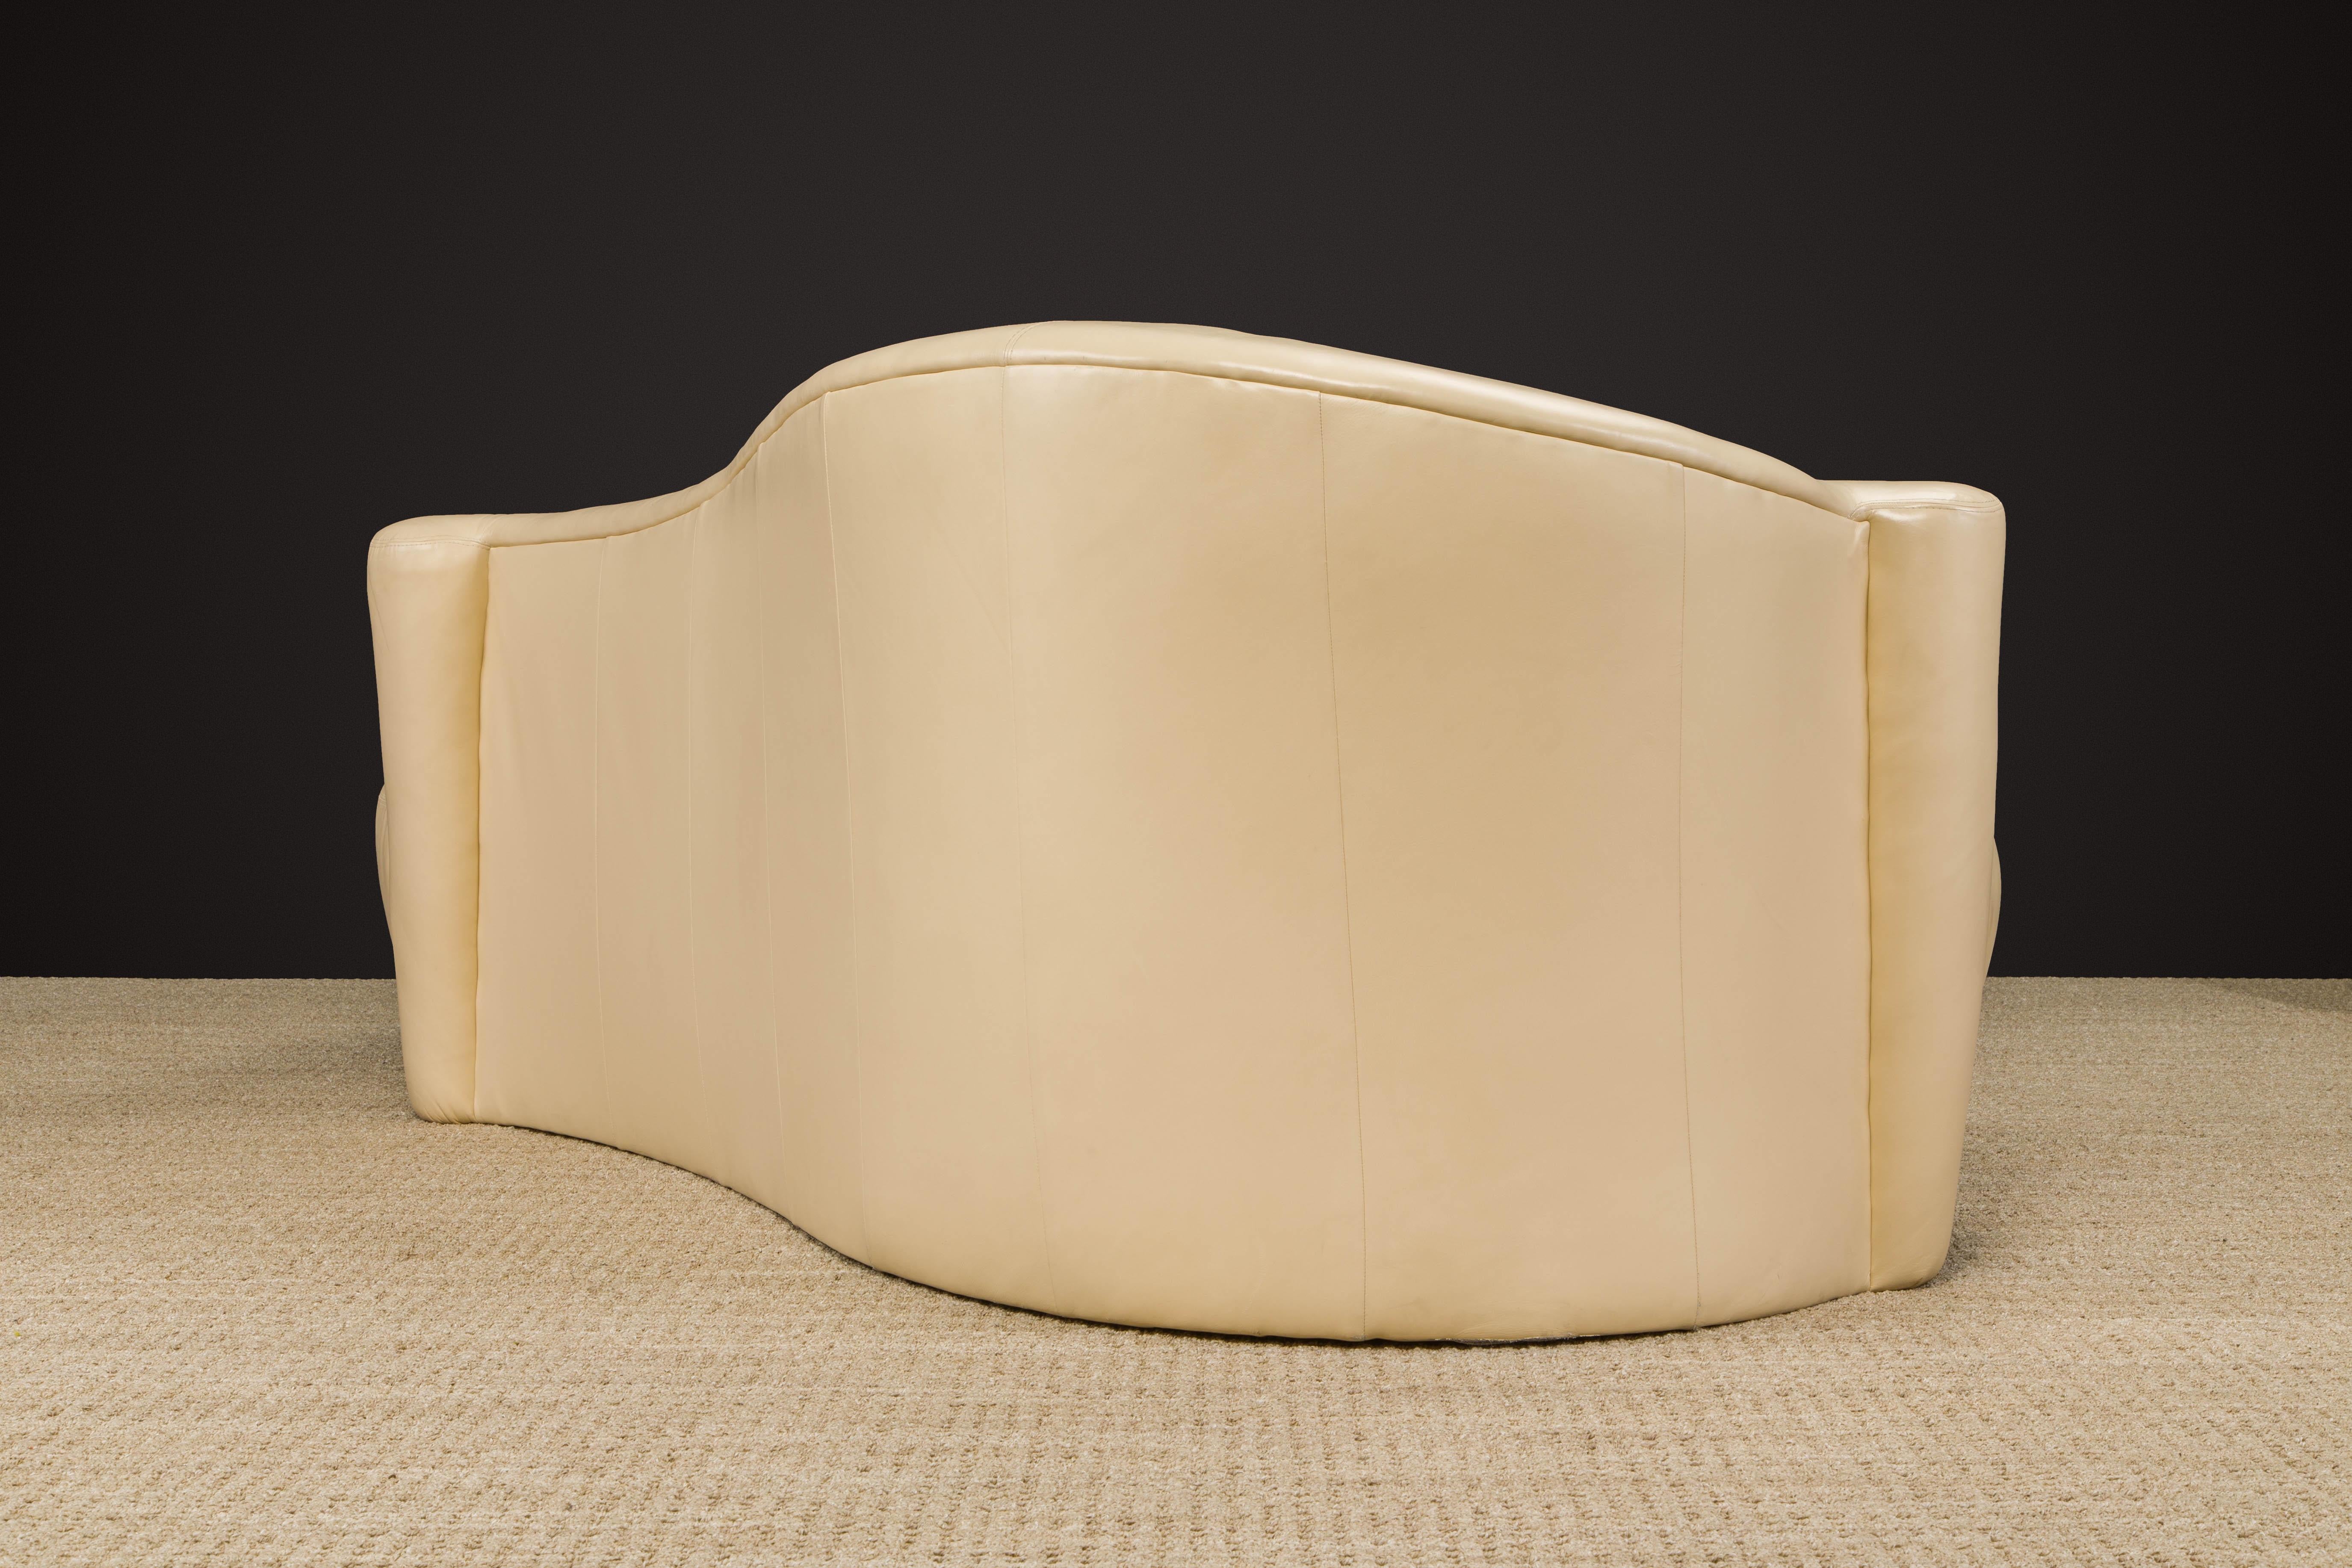 Tan Leather Cloud Style Sofa with Lucite Leg by Weiman, c 1980s, Signed For Sale 2